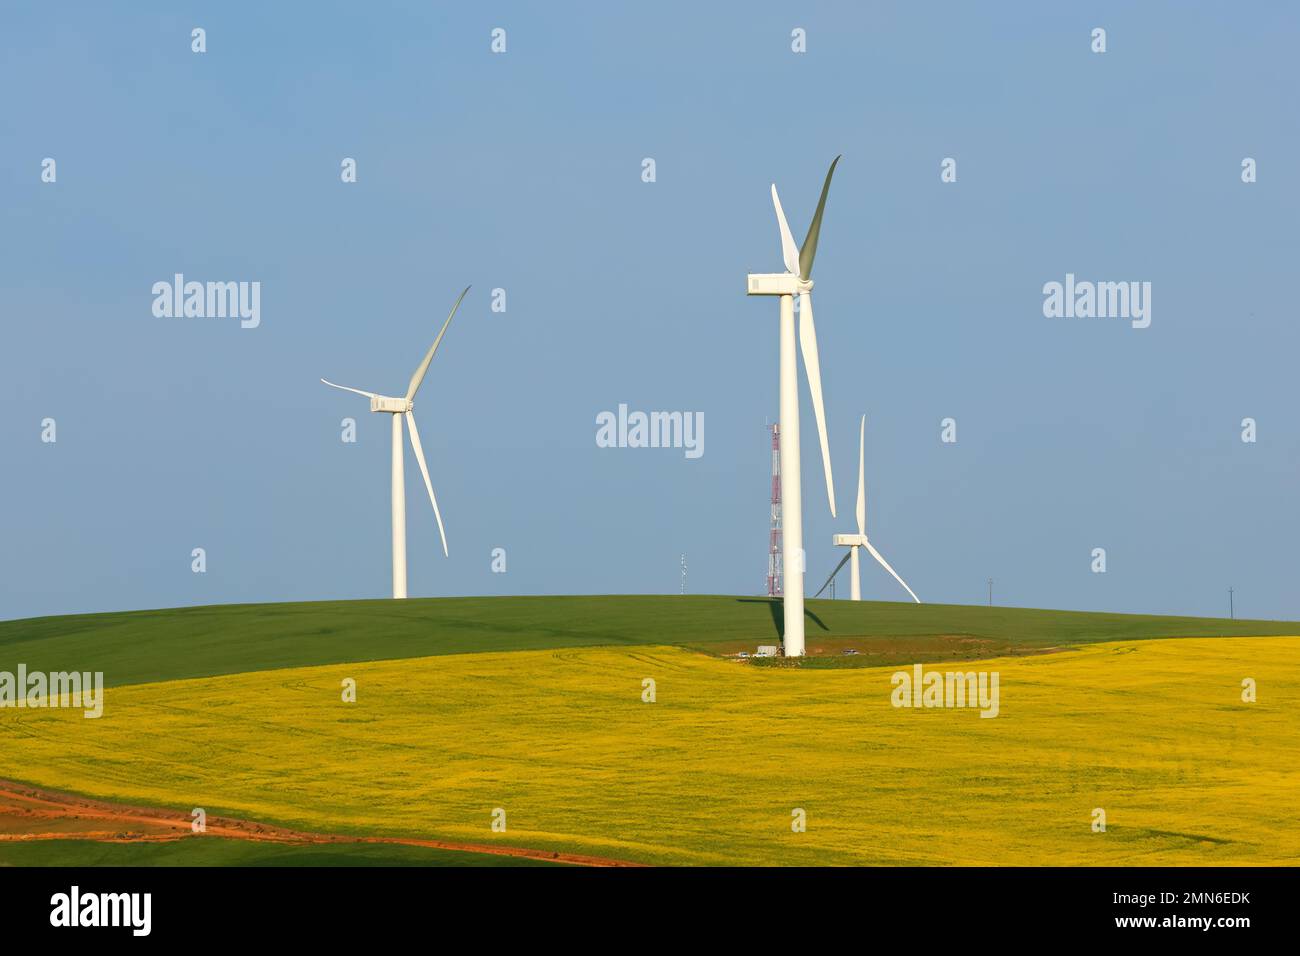 Wind turbines surrounded by lush crop fields, South Africa Stock Photo